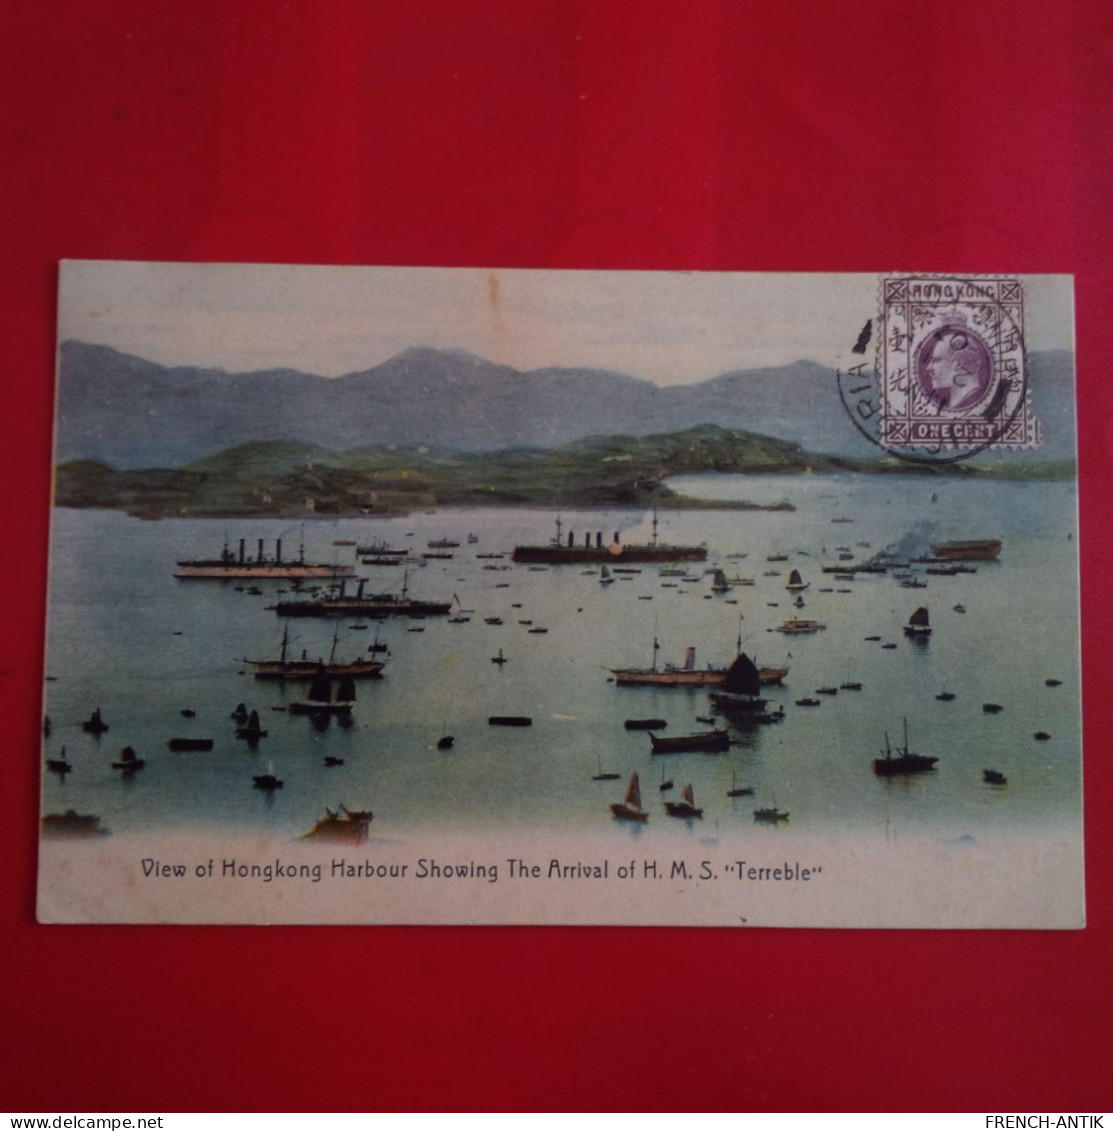 HONGKONG HARBOURG SHOWING THE ARRIVAL OF H.M.S.TERREBLE - Chine (Hong Kong)